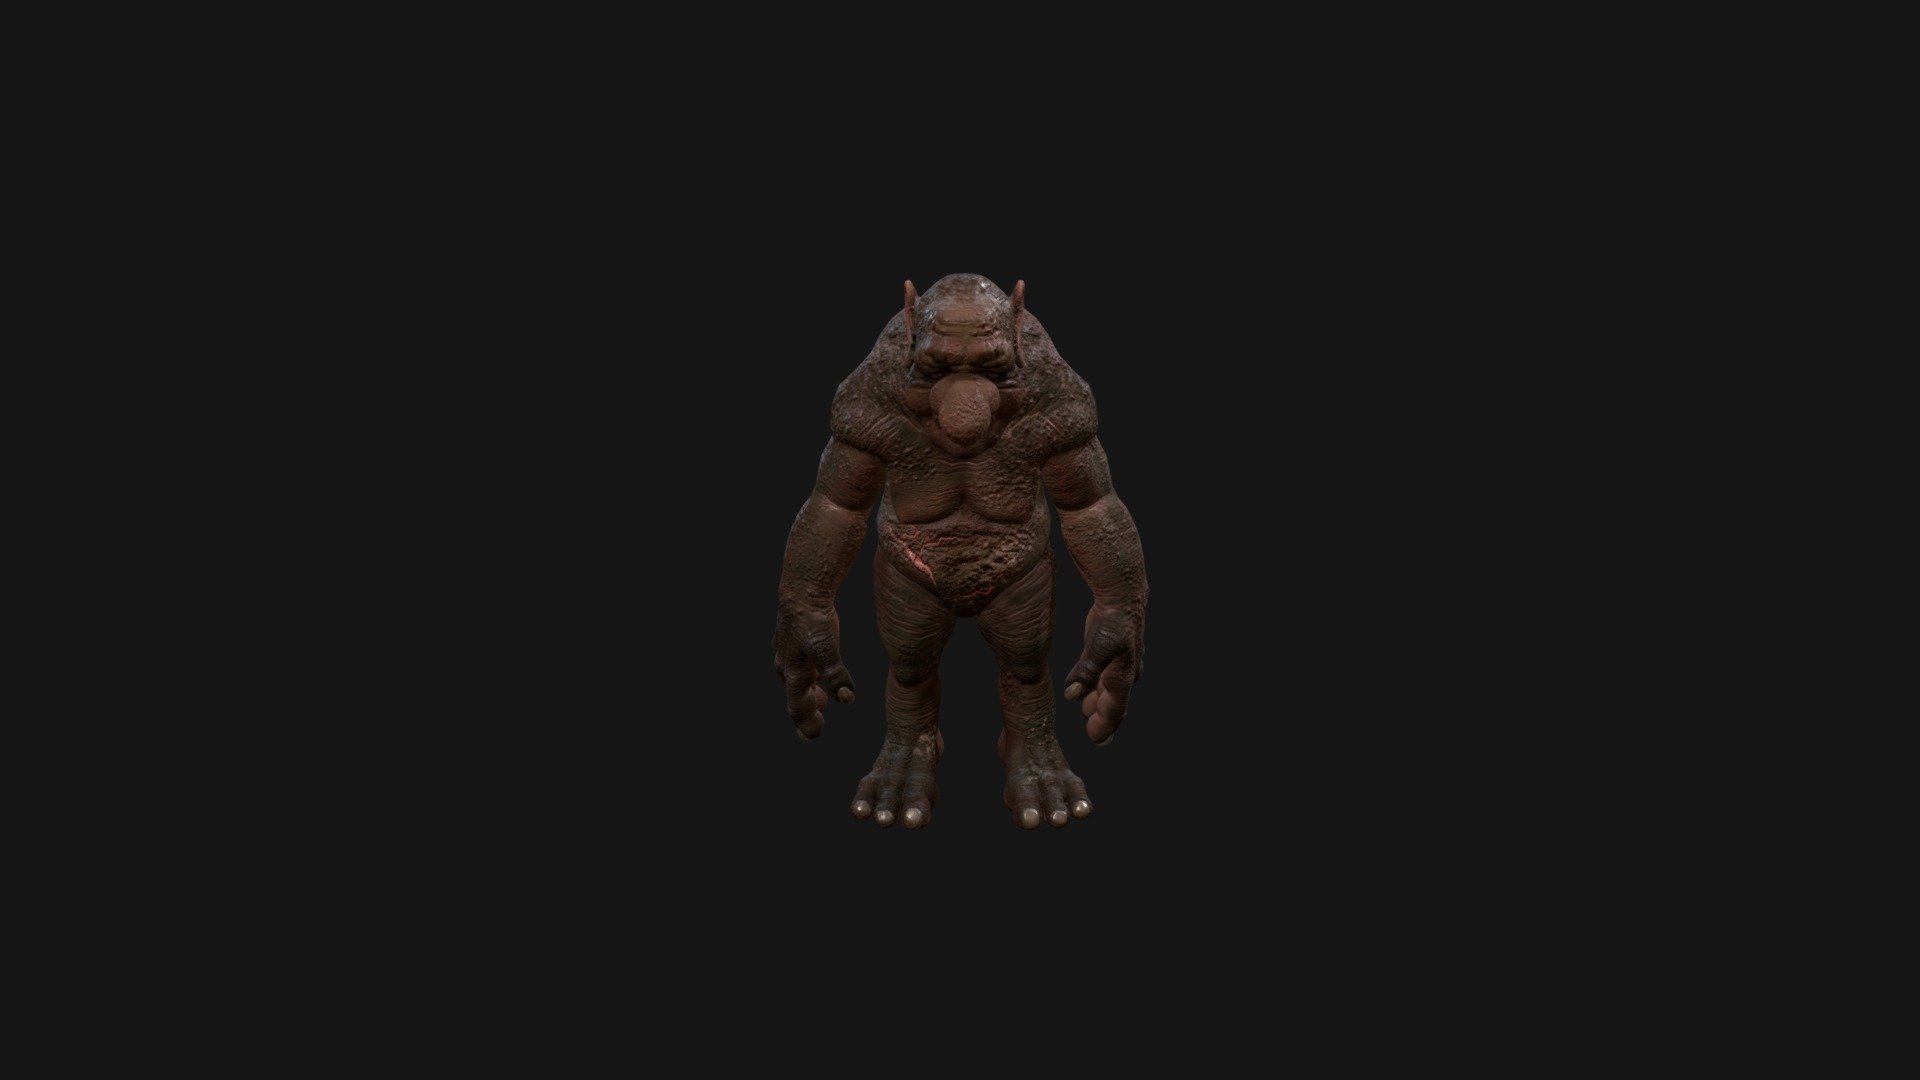 Game ready 3d model of Forest Troll .
Model perfomed in 3d Coat and Blender 2.83. Rigged and animated in Blender.
For rigging and animation I used RIGIFY bone system. So you can create your animation.
Unity project with test C# script included. Just press Q-O keys to check animations in Unity.
Model contains 4756 Polygons .
Project contains two Trolls - armed and unarmed - unarmed forest troll - 3D model by jangbrao 3d model